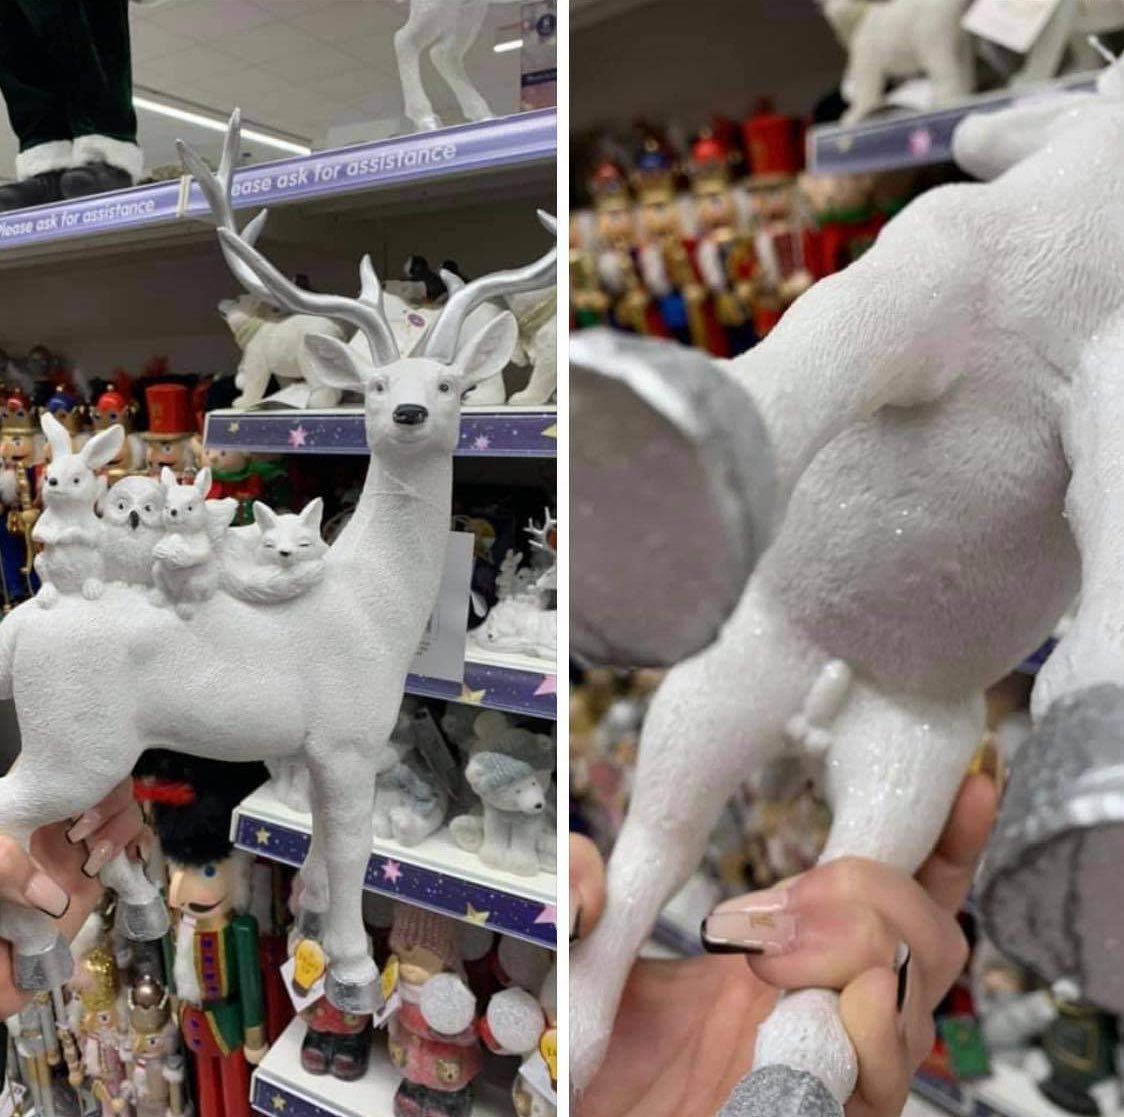 A Christmas decoration with a willy. Noice.